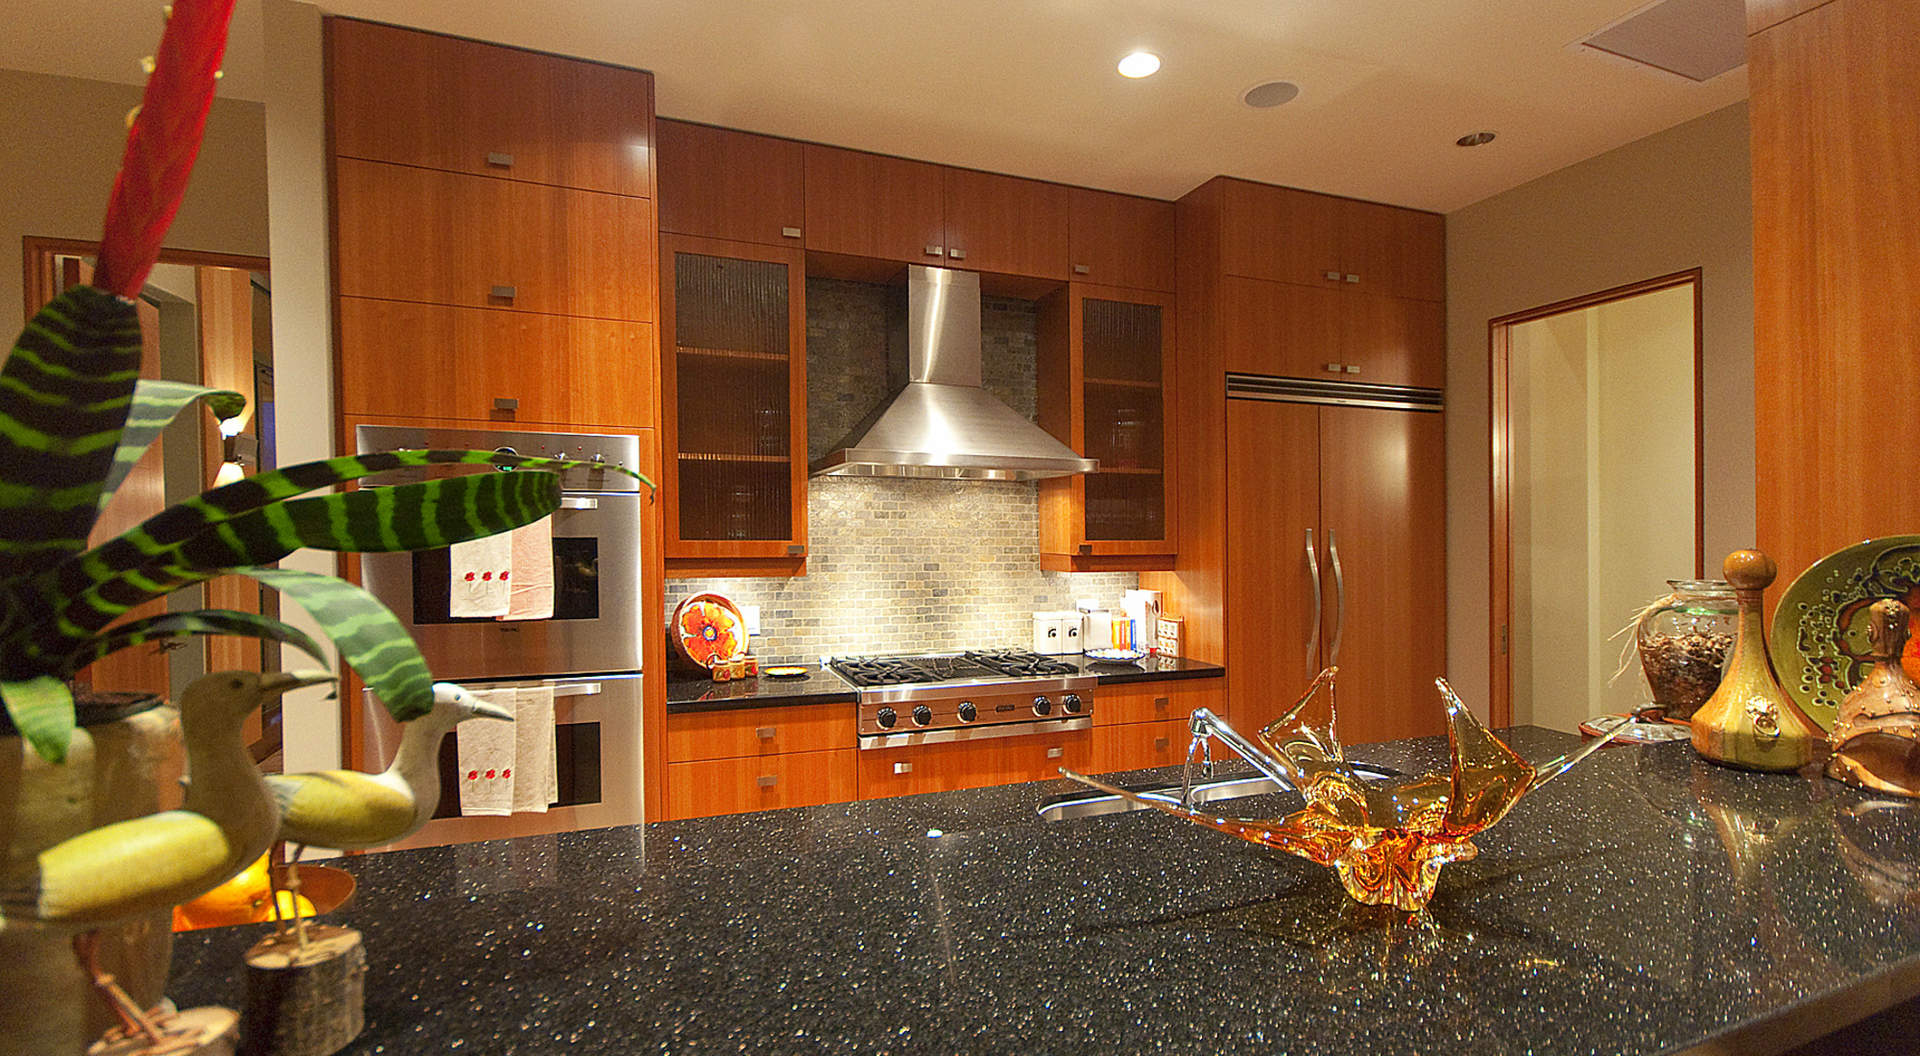 Top Appilance Package and Granite Counter Tops